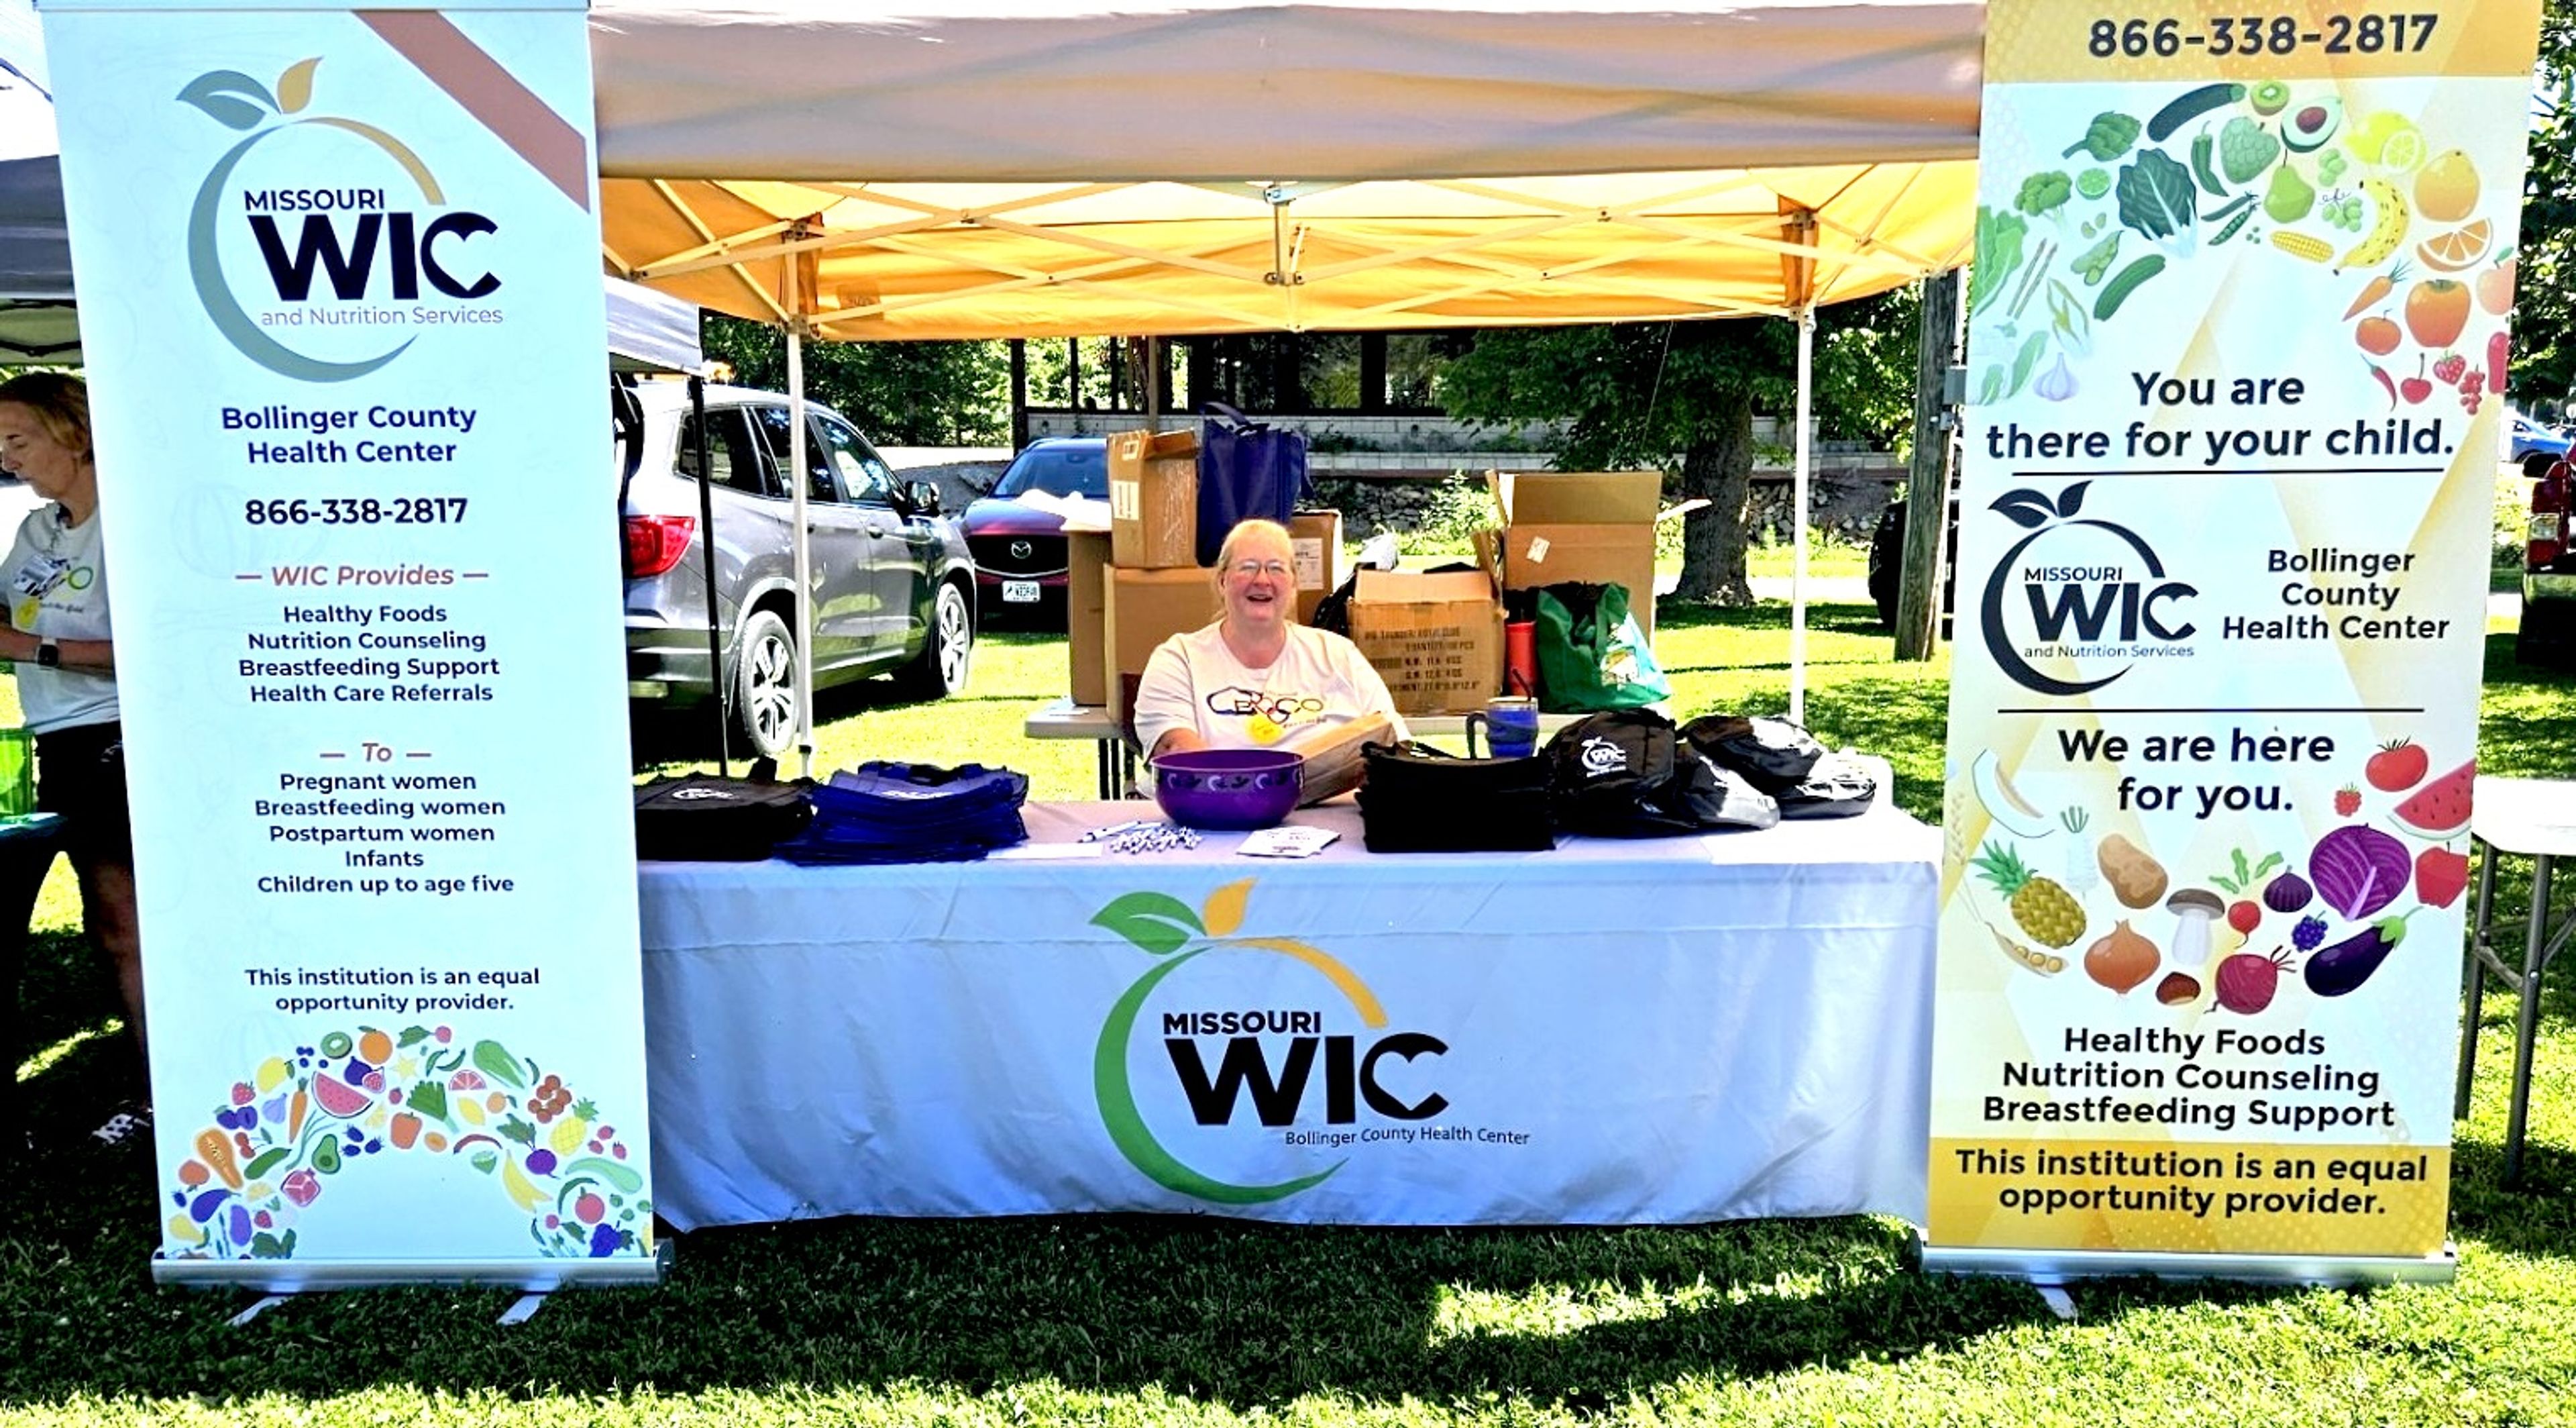 Betsy VanGennip is on hand to greet anyone interested in learning more about WIC.